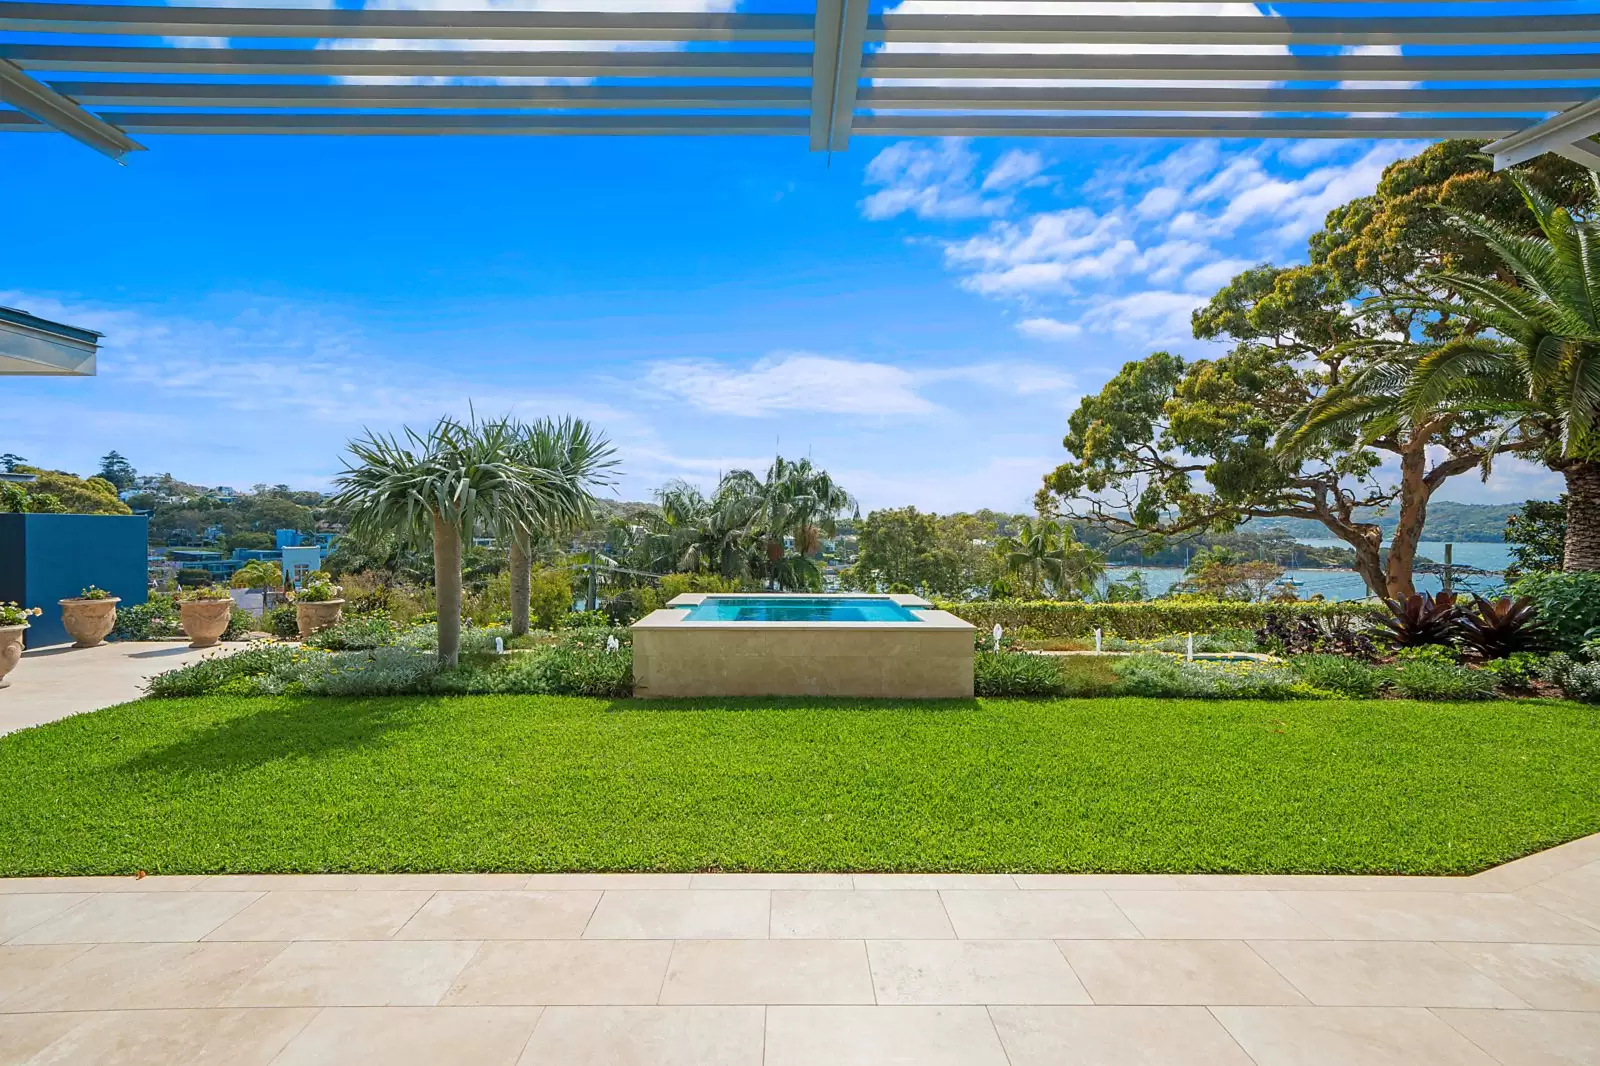 Photo #3: 97 Wentworth Road, Vaucluse - For Sale by Sydney Sotheby's International Realty